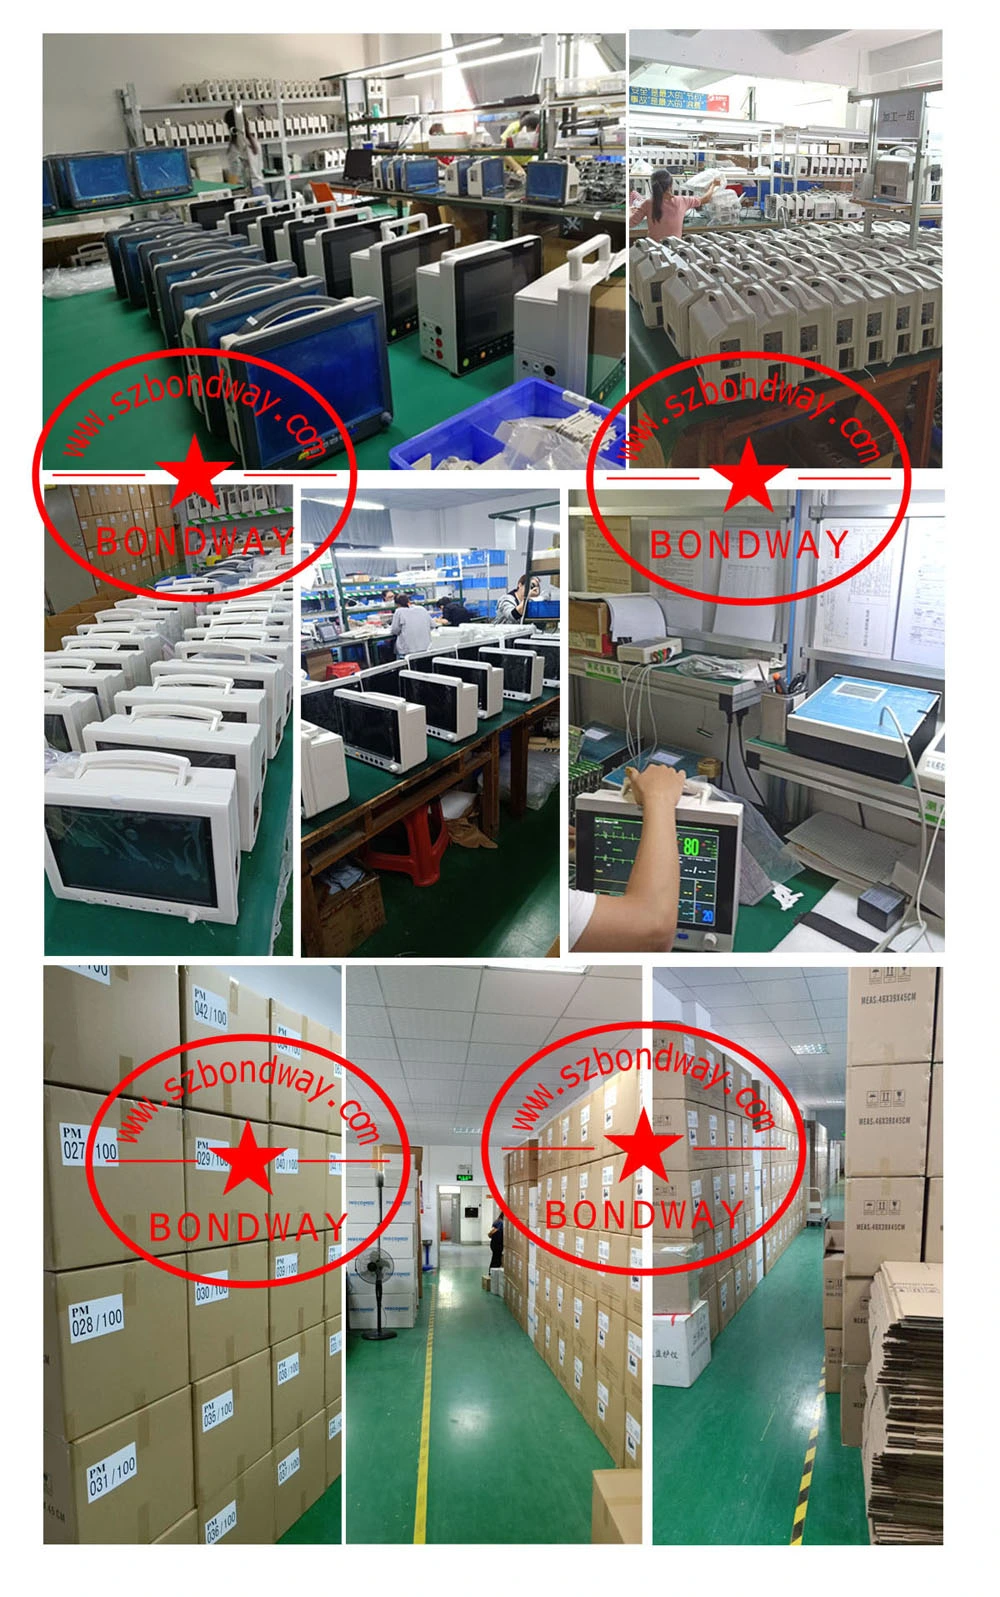 Portable Patient Monitoring System, Bw3a, Made in China, Multiparameter Patient Monitor